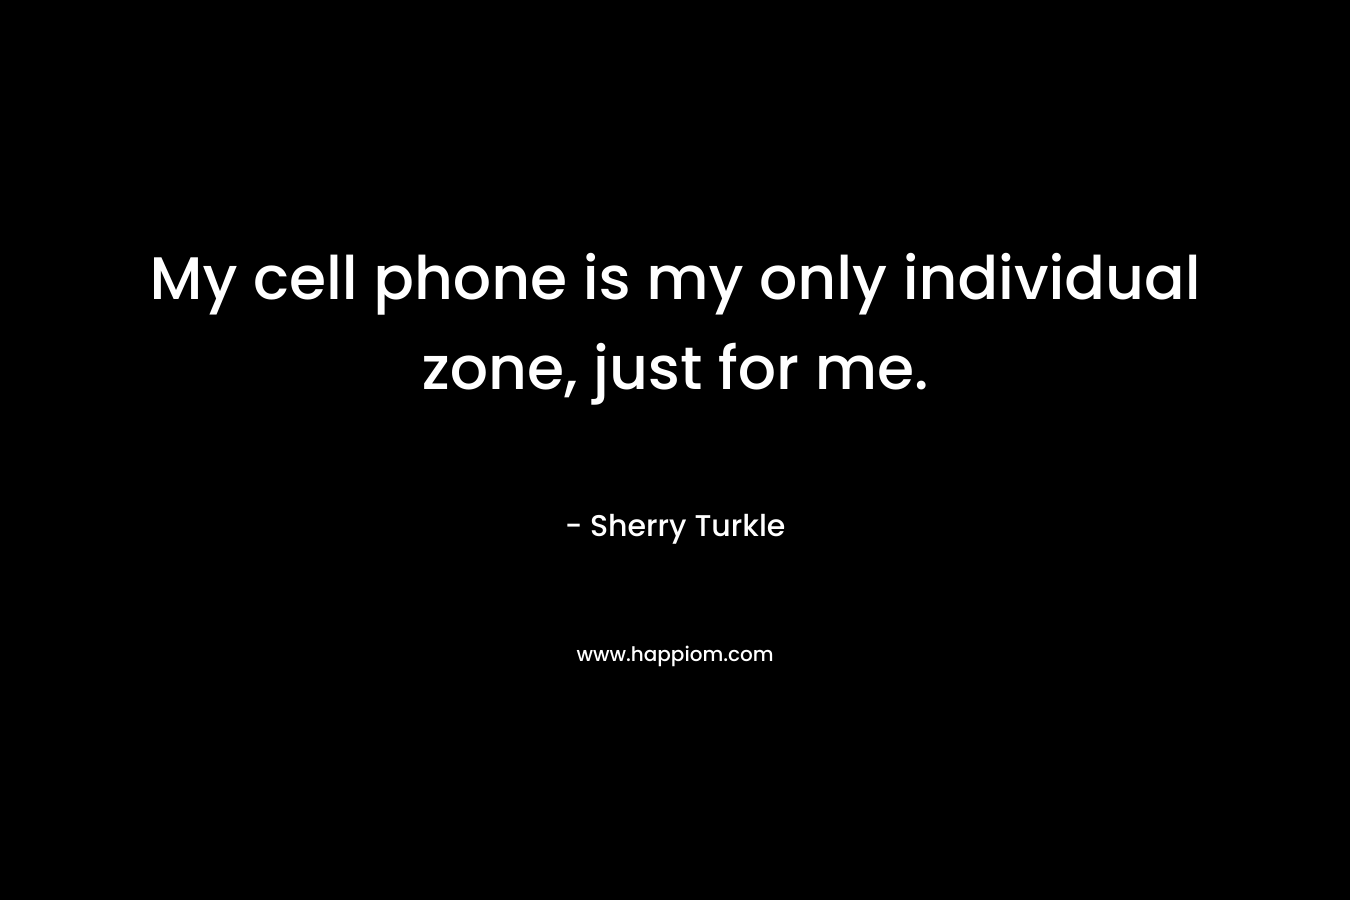 My cell phone is my only individual zone, just for me. – Sherry Turkle